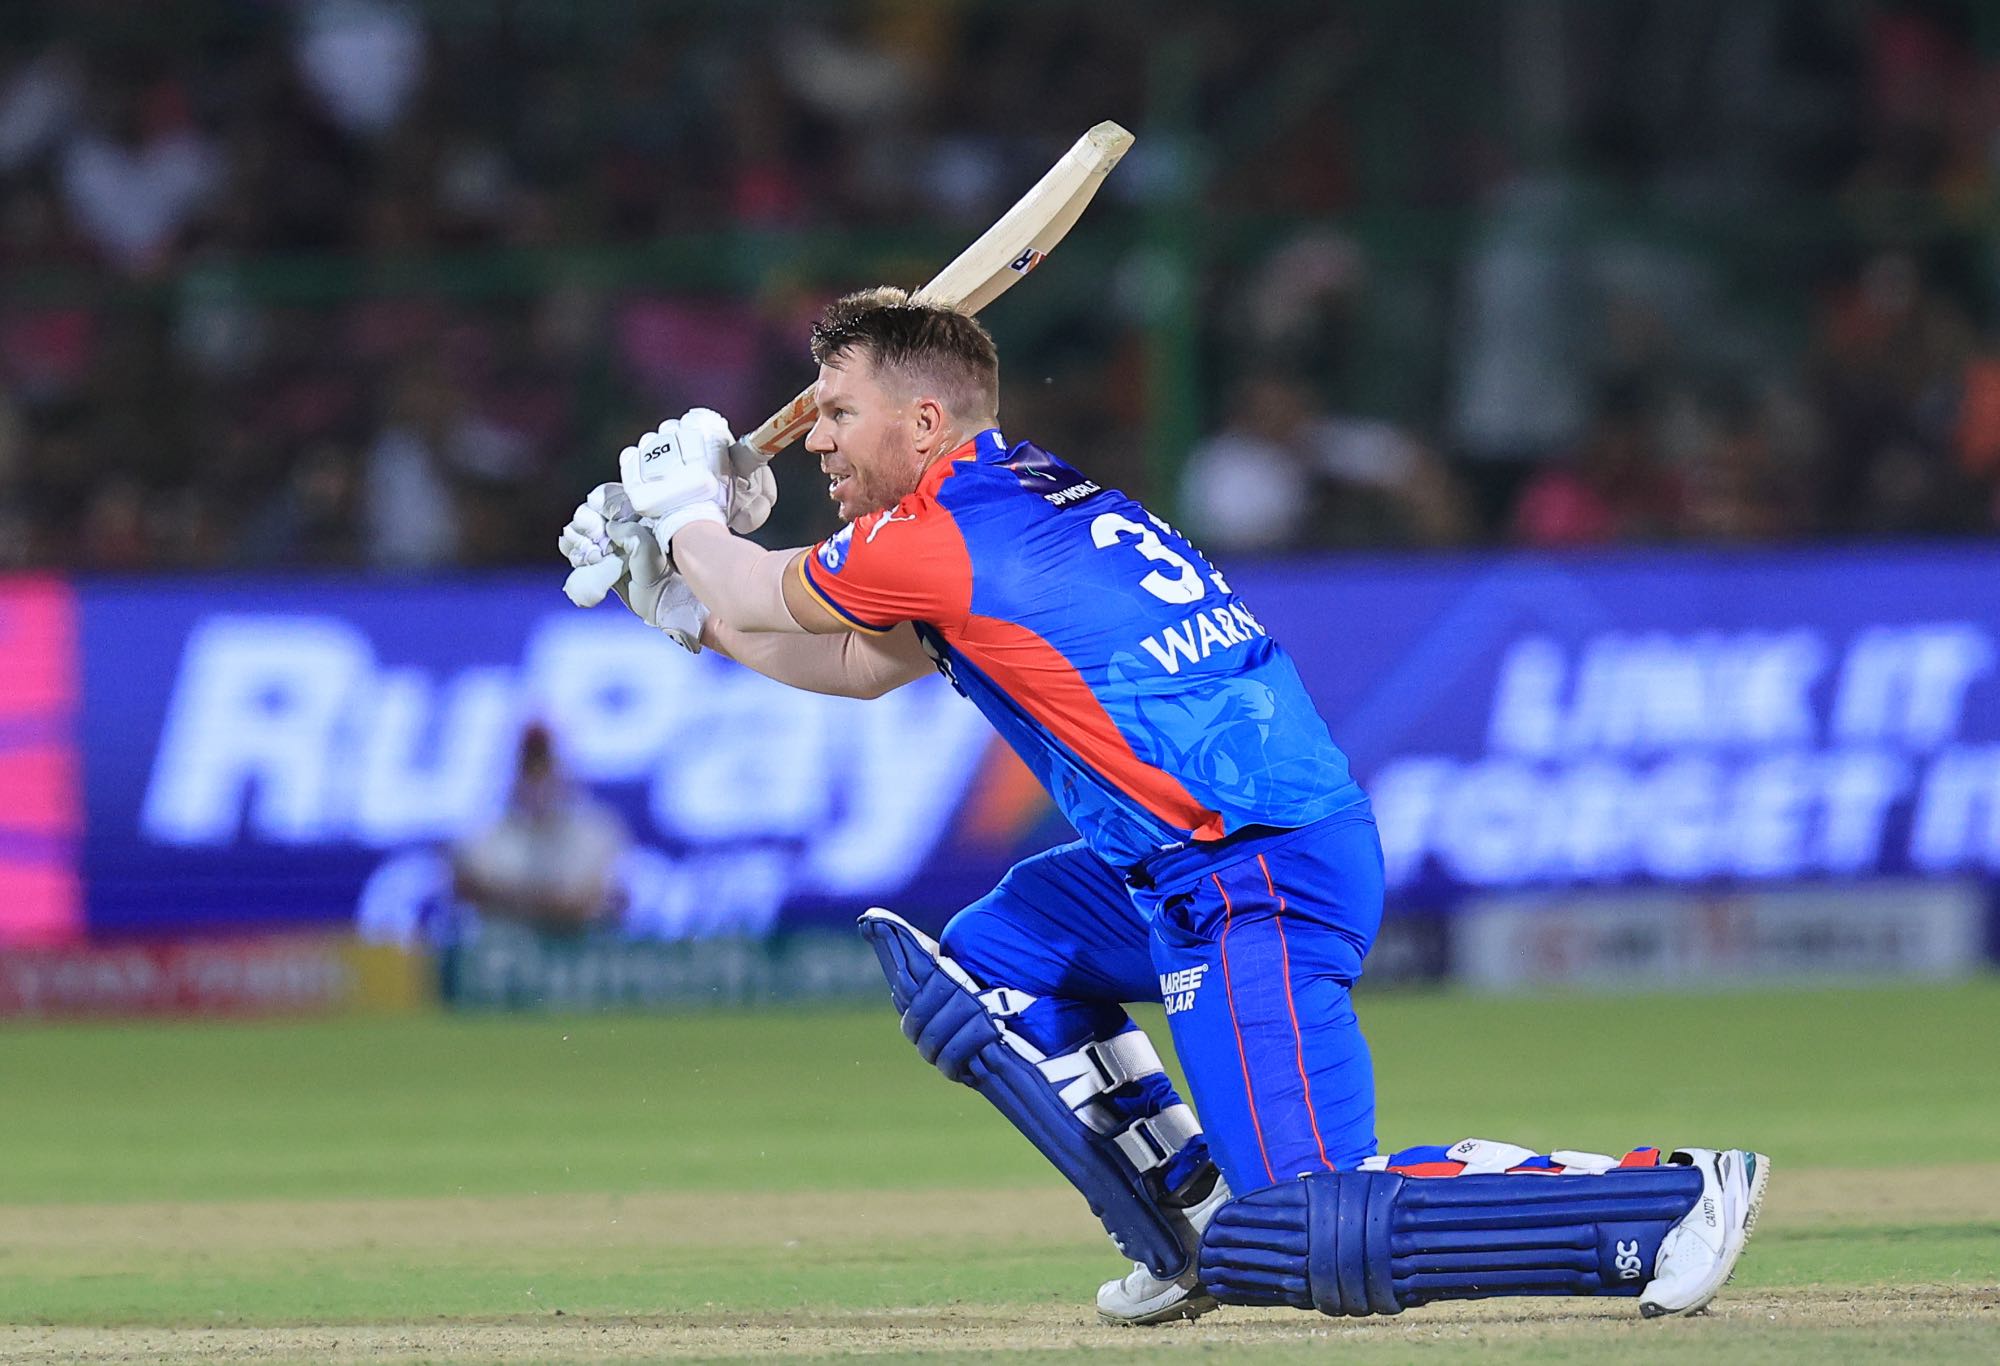 David Warner of the Delhi Capitals is playing a shot during the Indian Premier League (IPL) 2024 T20 cricket match between the Rajasthan Royals and Delhi Capitals at Sawai Mansingh Stadium in Jaipur, Rajasthan, India, on March 28, 2024. (Photo by Vishal Bhatnagar/NurPhoto via Getty Images)